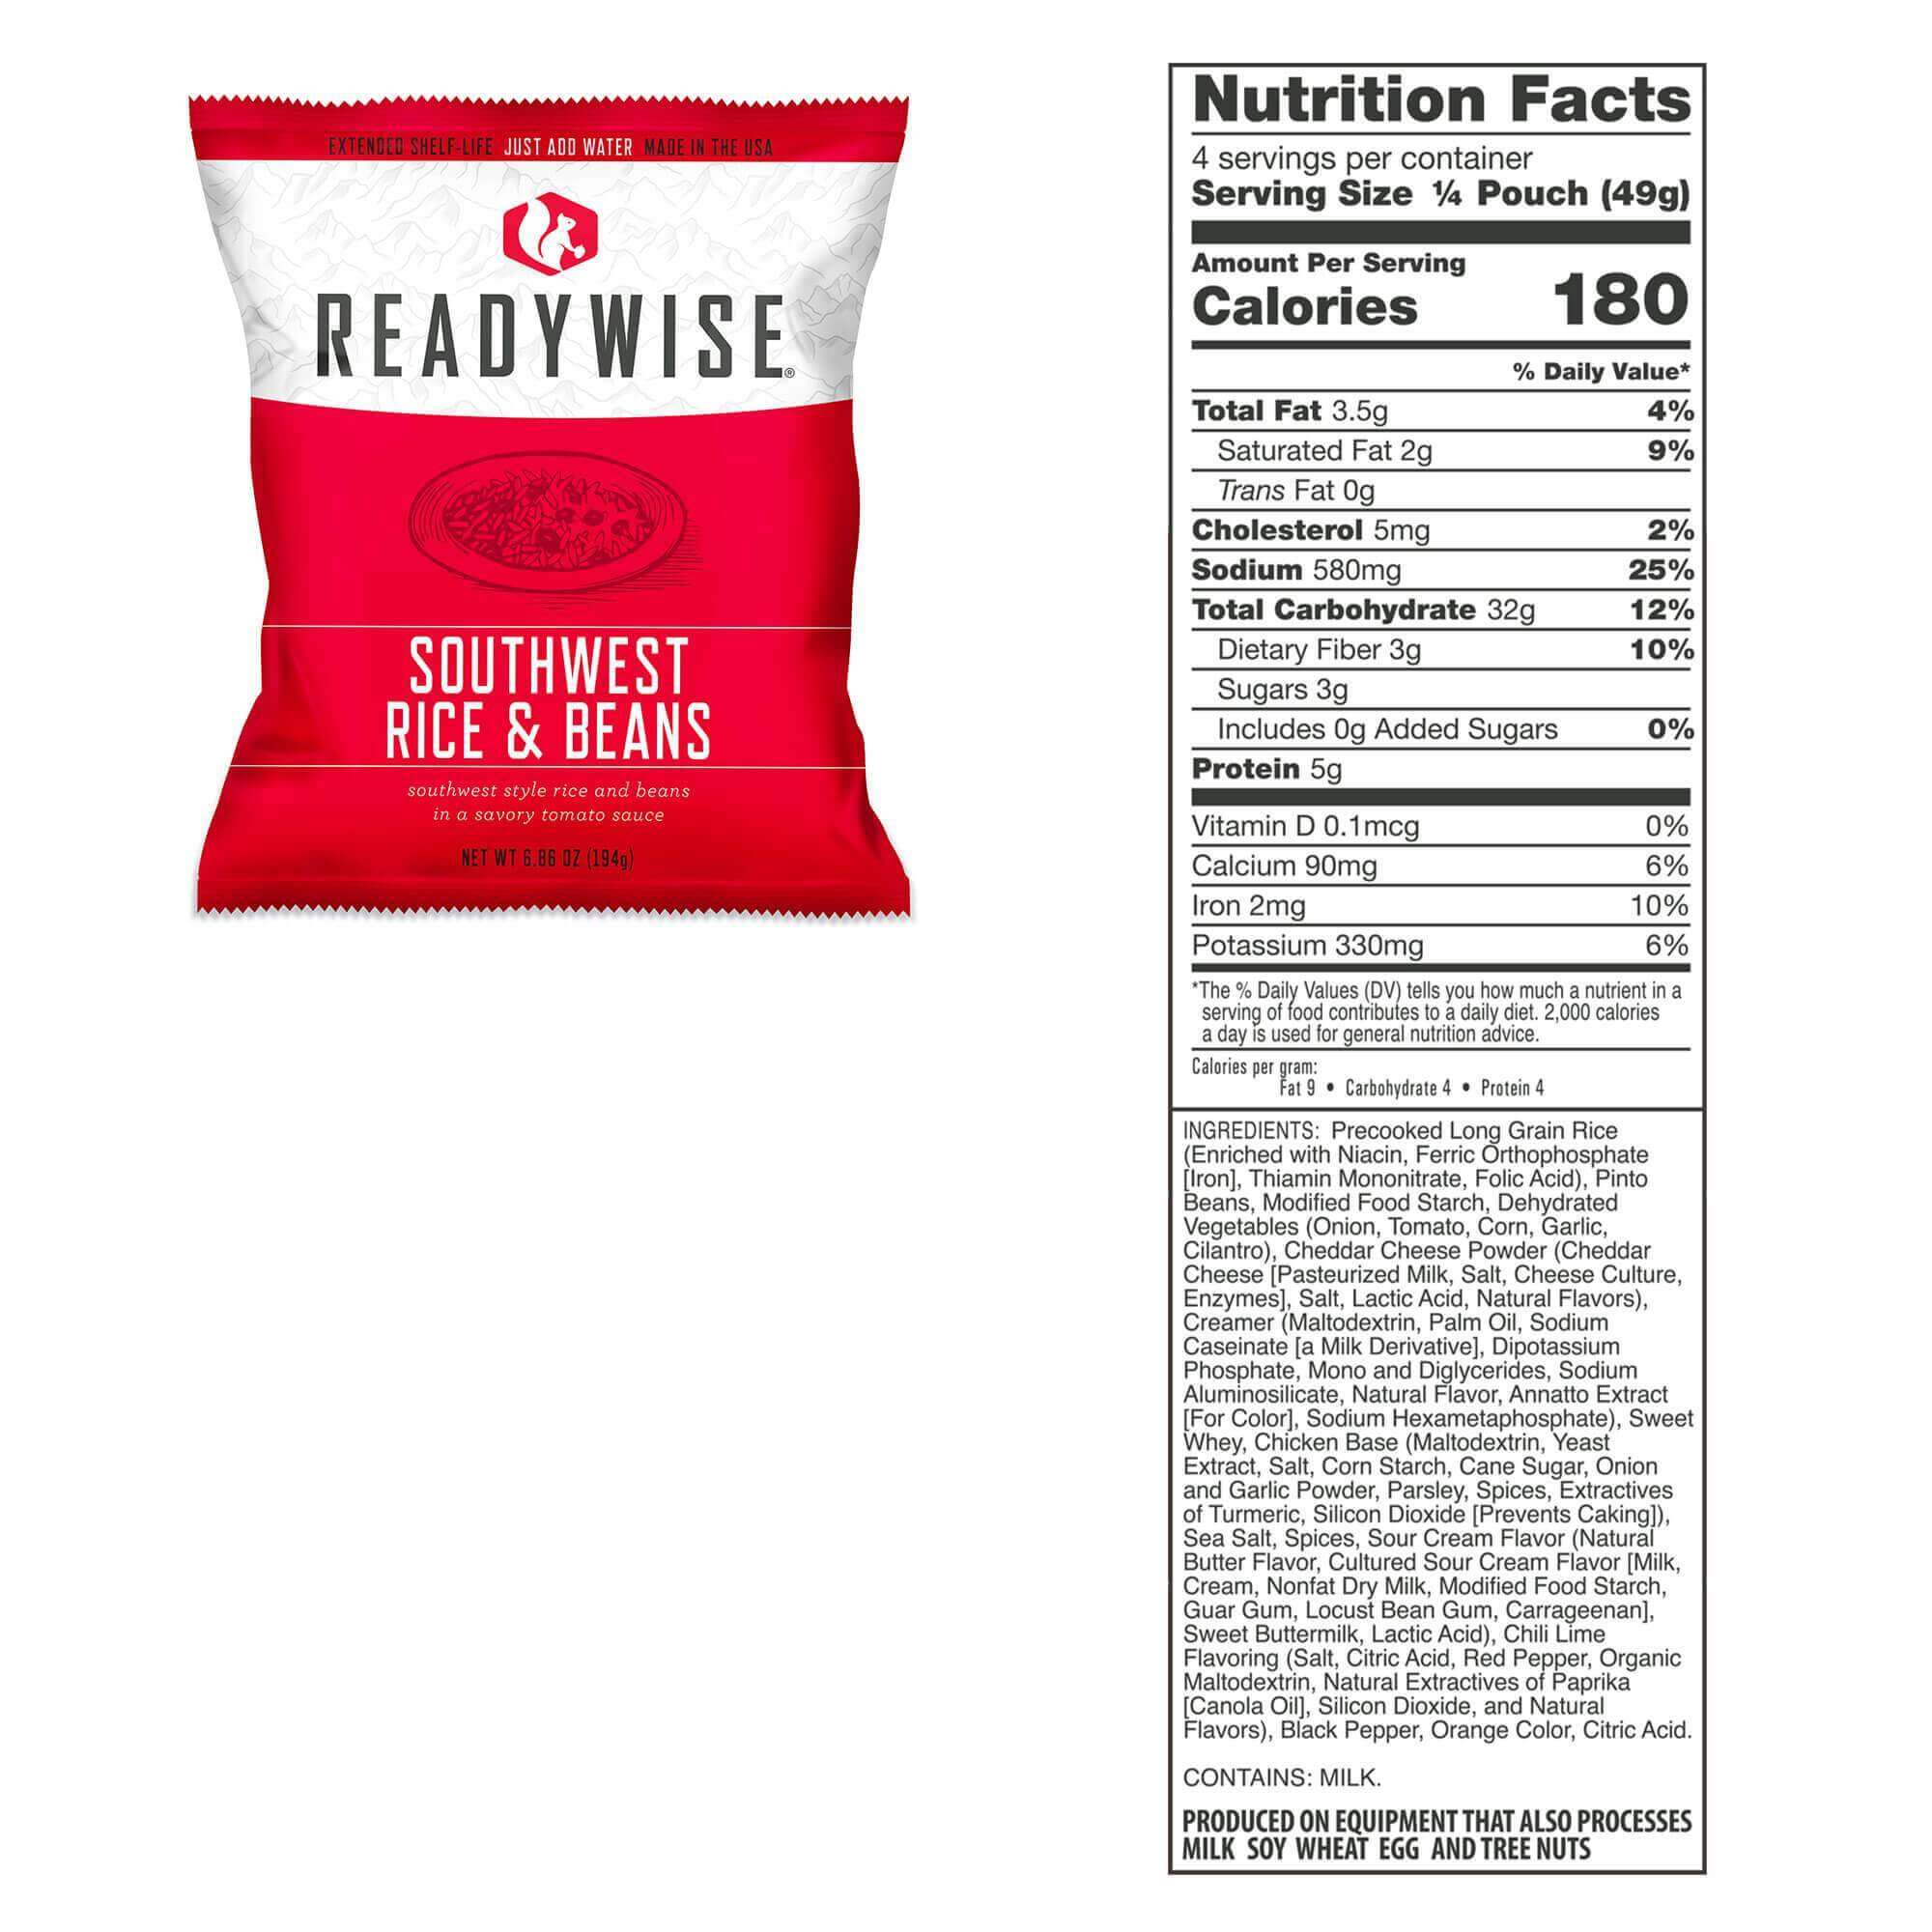 ReadyWise (formerly Wise Food Storage) 1 Year Kit for 2 People - 2160 Serving Package - 372 lbs - Includes 12 - 120 Serving Entree Buckets and 6 - 120 Serving Breakfast Buckets (SHIPS IN 1-2 WEEKS). ReadyWise readywise readywise readywise readywise readywise readywise readywise readywise.